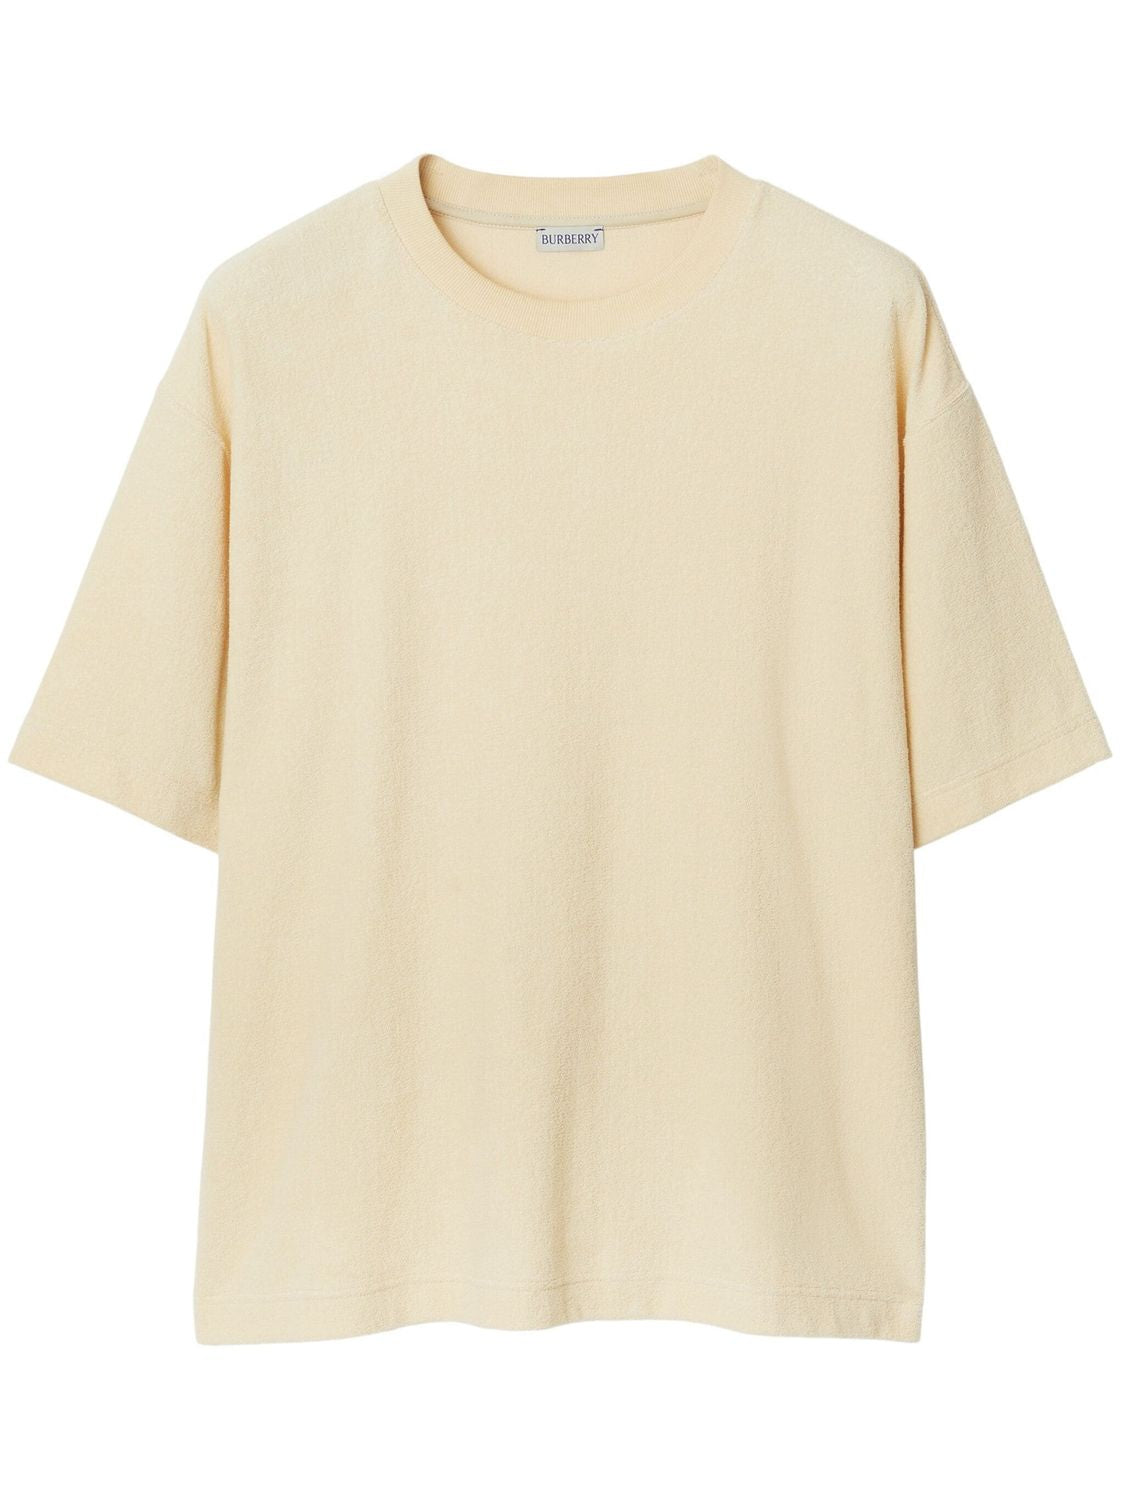 BURBERRY Beige Ruffle T-Shirt for Women - SS24 Collection